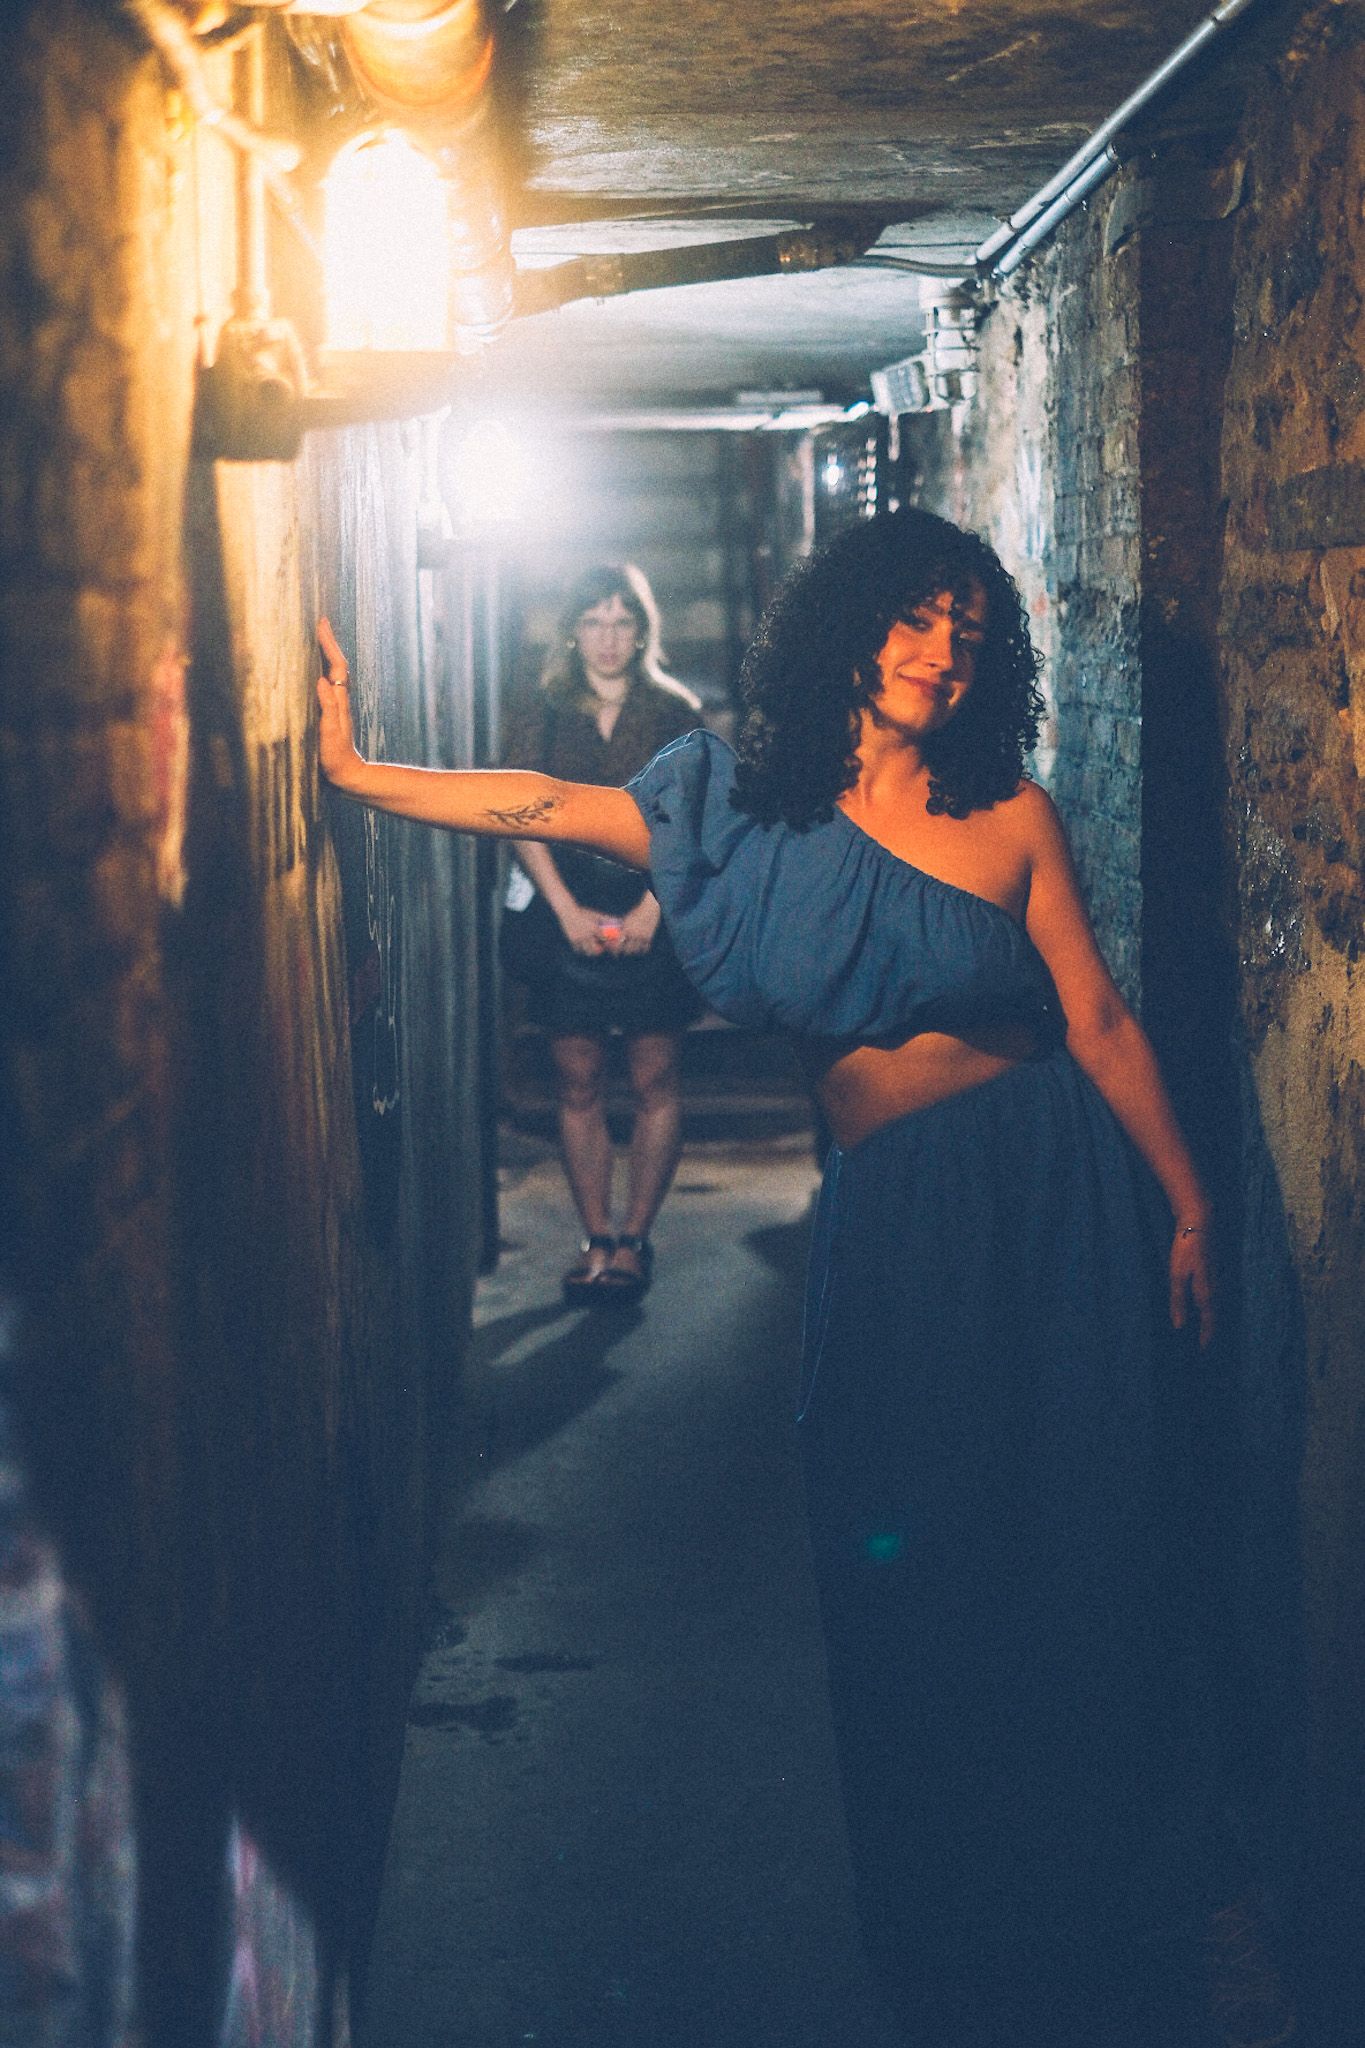 Two women stand in a dark alleyway lit by two lights, one warm and one cooler. In the front, the woman wears a blue dress, in focus, her arm across the alleyway and hand against the brick wall. In the back, the second woman stands out of focus, hands together near her lap.